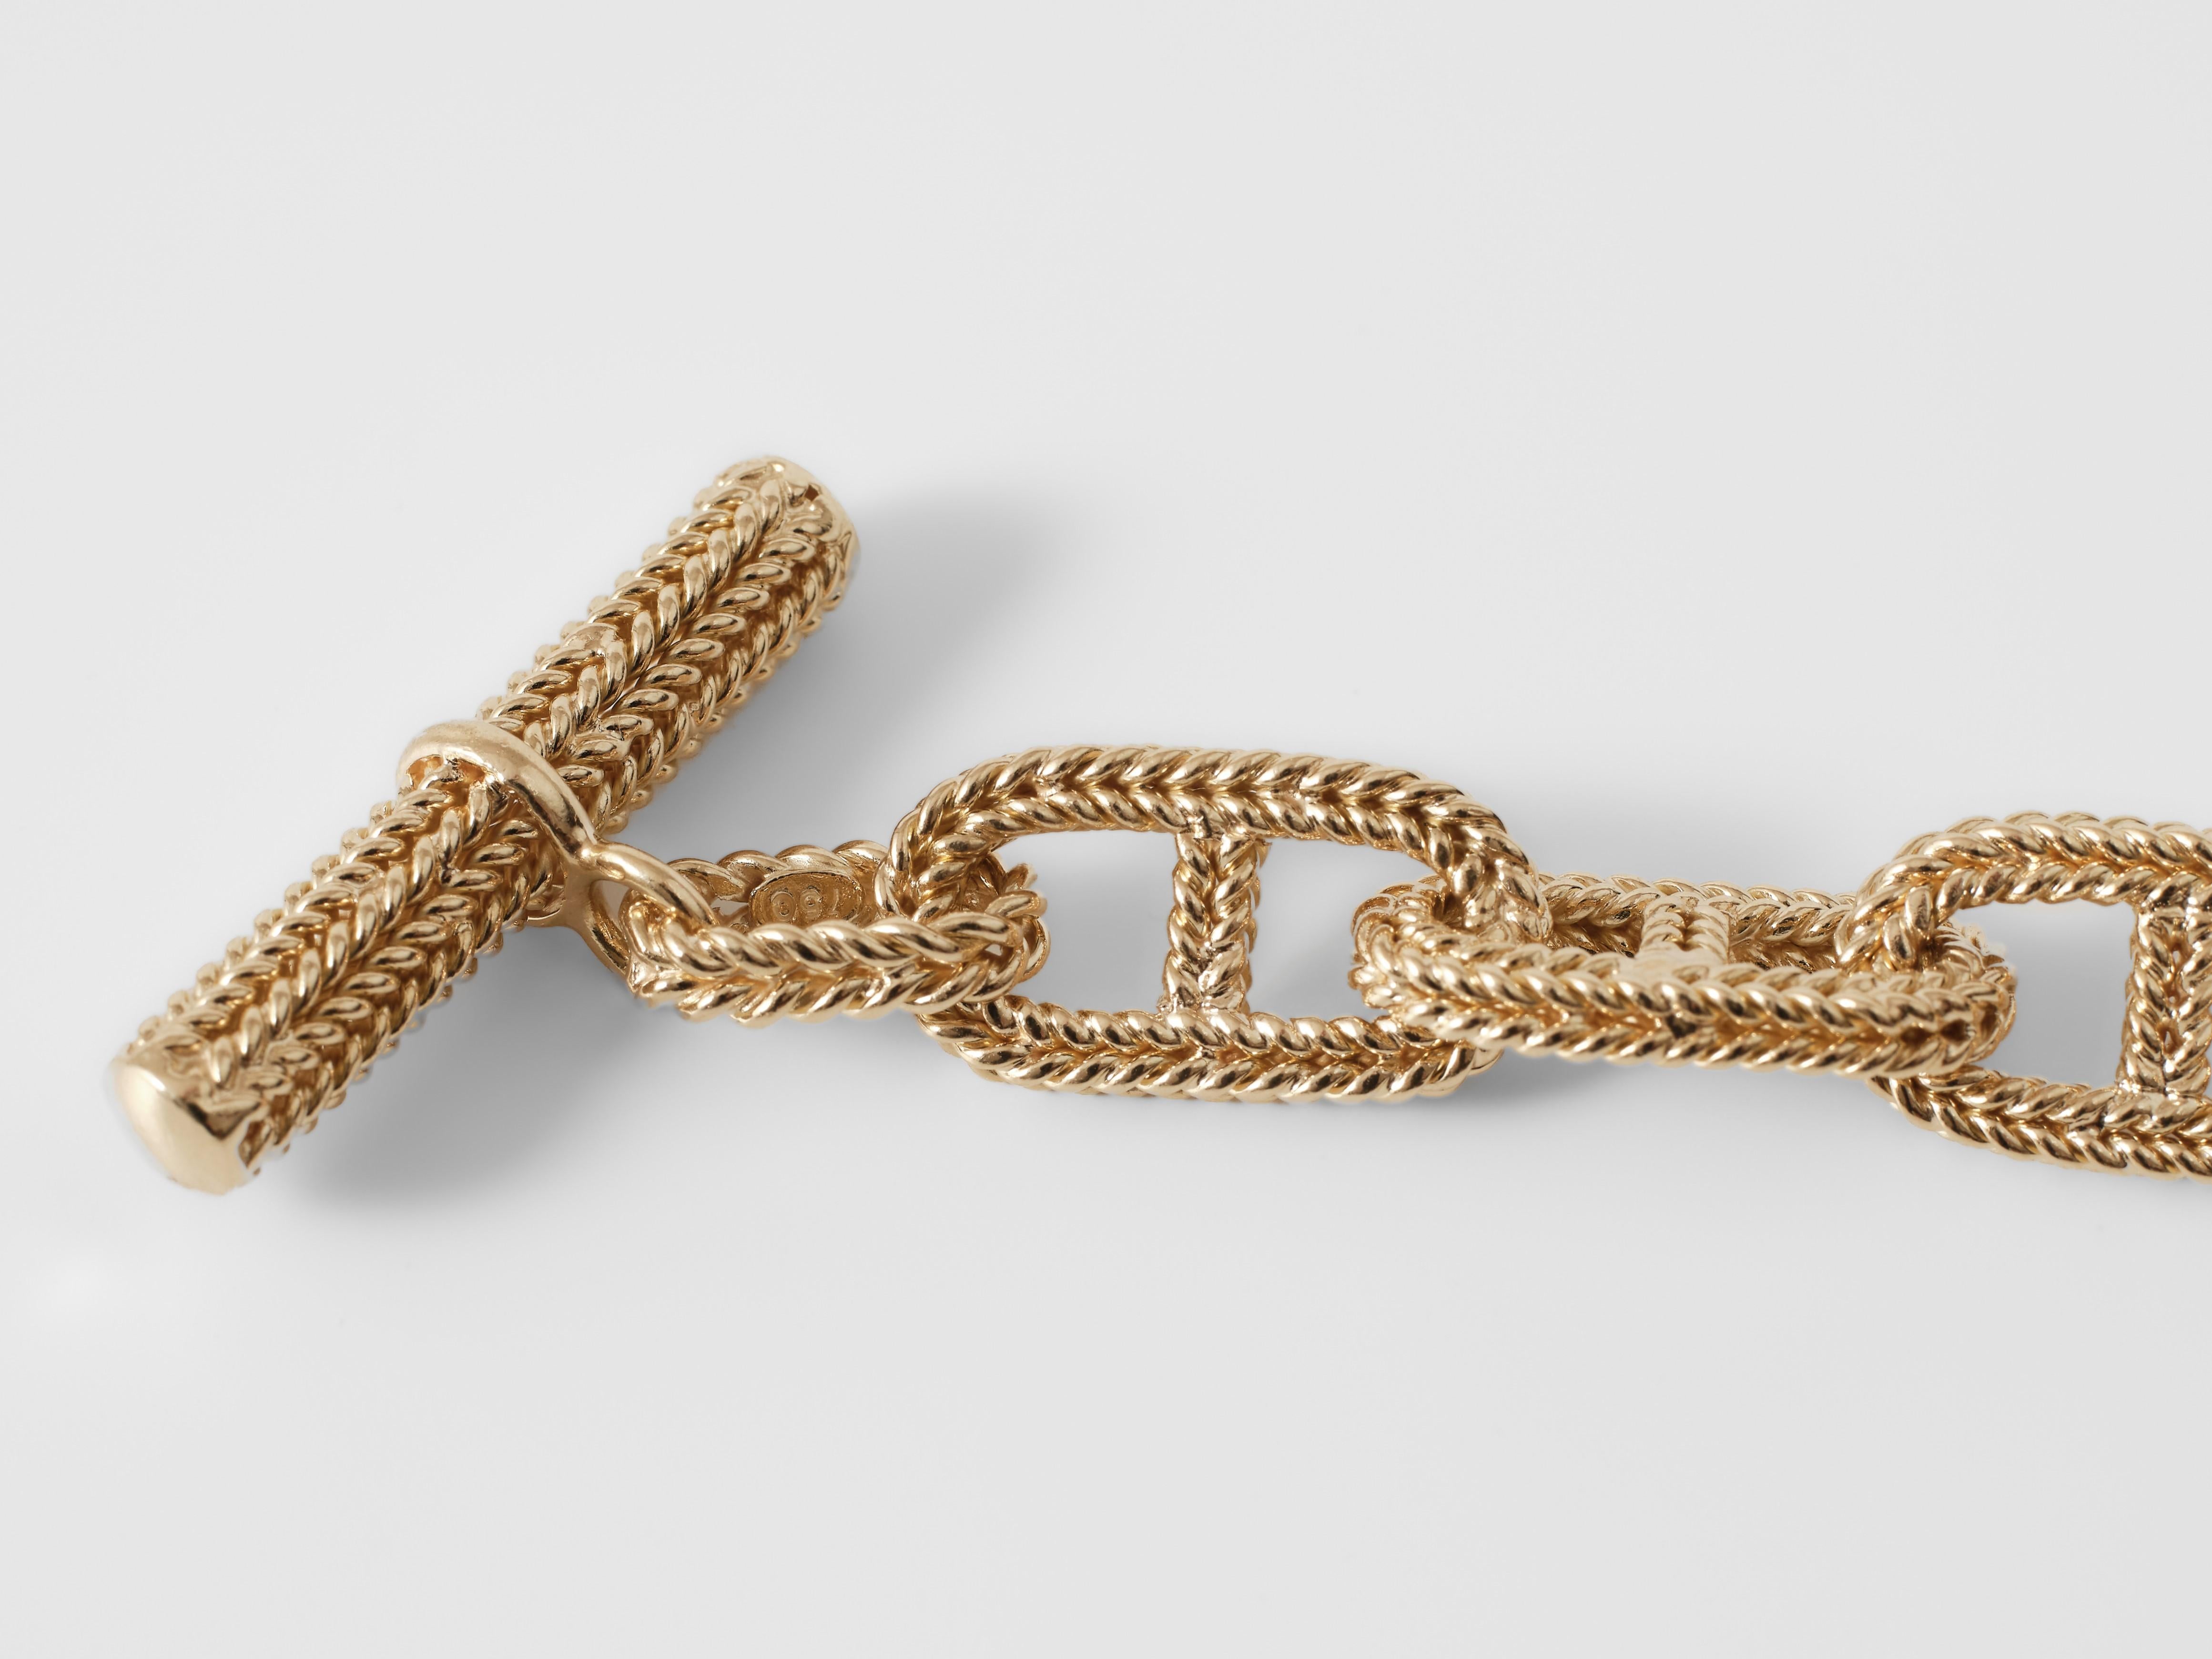 Women's or Men's Chaine d’Ancre bracelet with toggle clasp, 18 karat gold, circa 1950-60